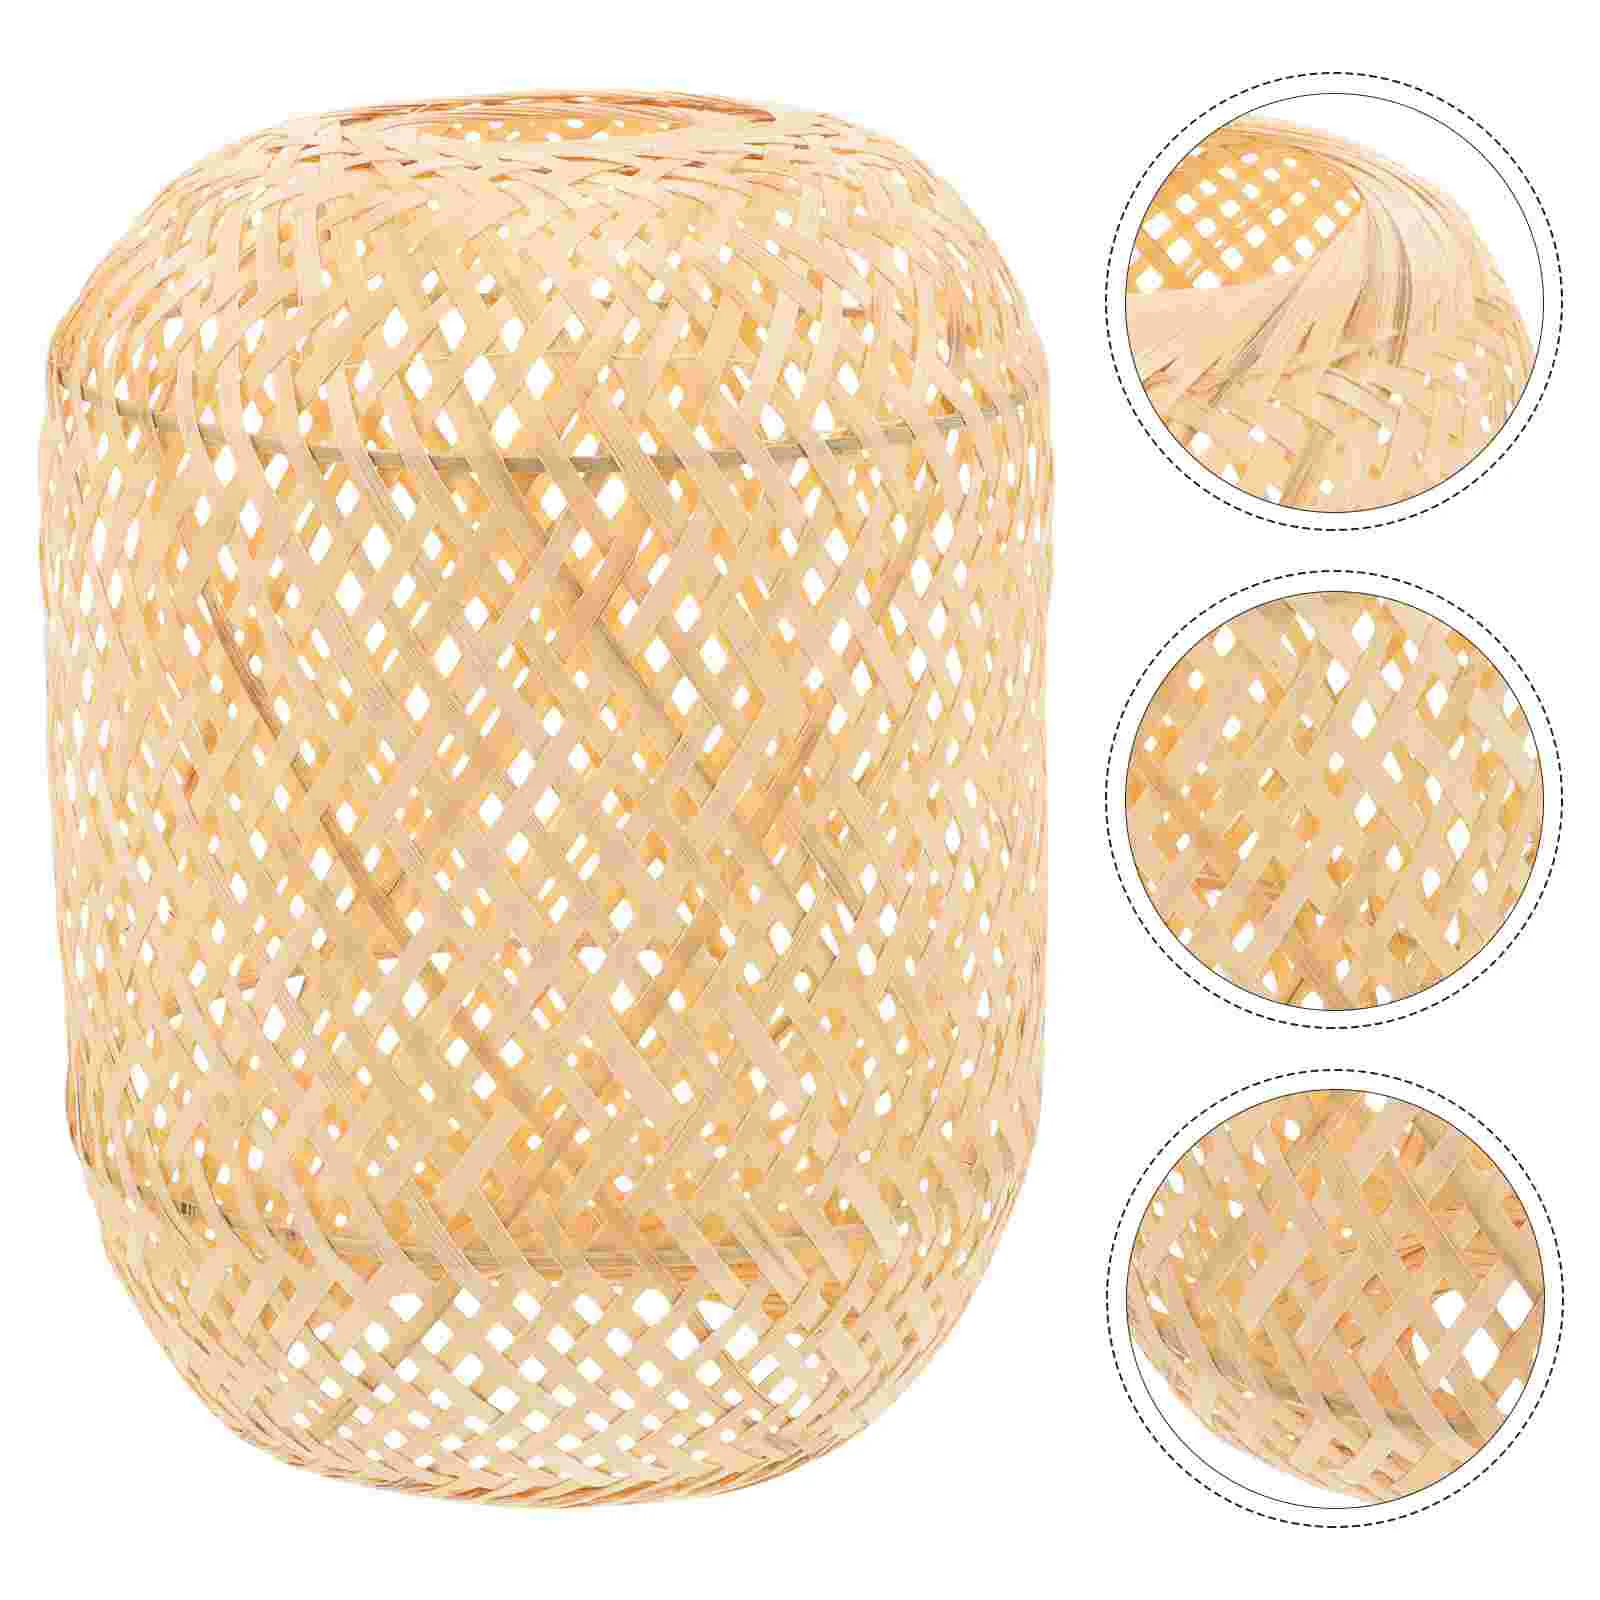 

Bamboo Lampshade Covers Bedside Table Decorative Rattan Pendant Light for Fixtures Woven Desk Lampshades Hanging Rustic Style